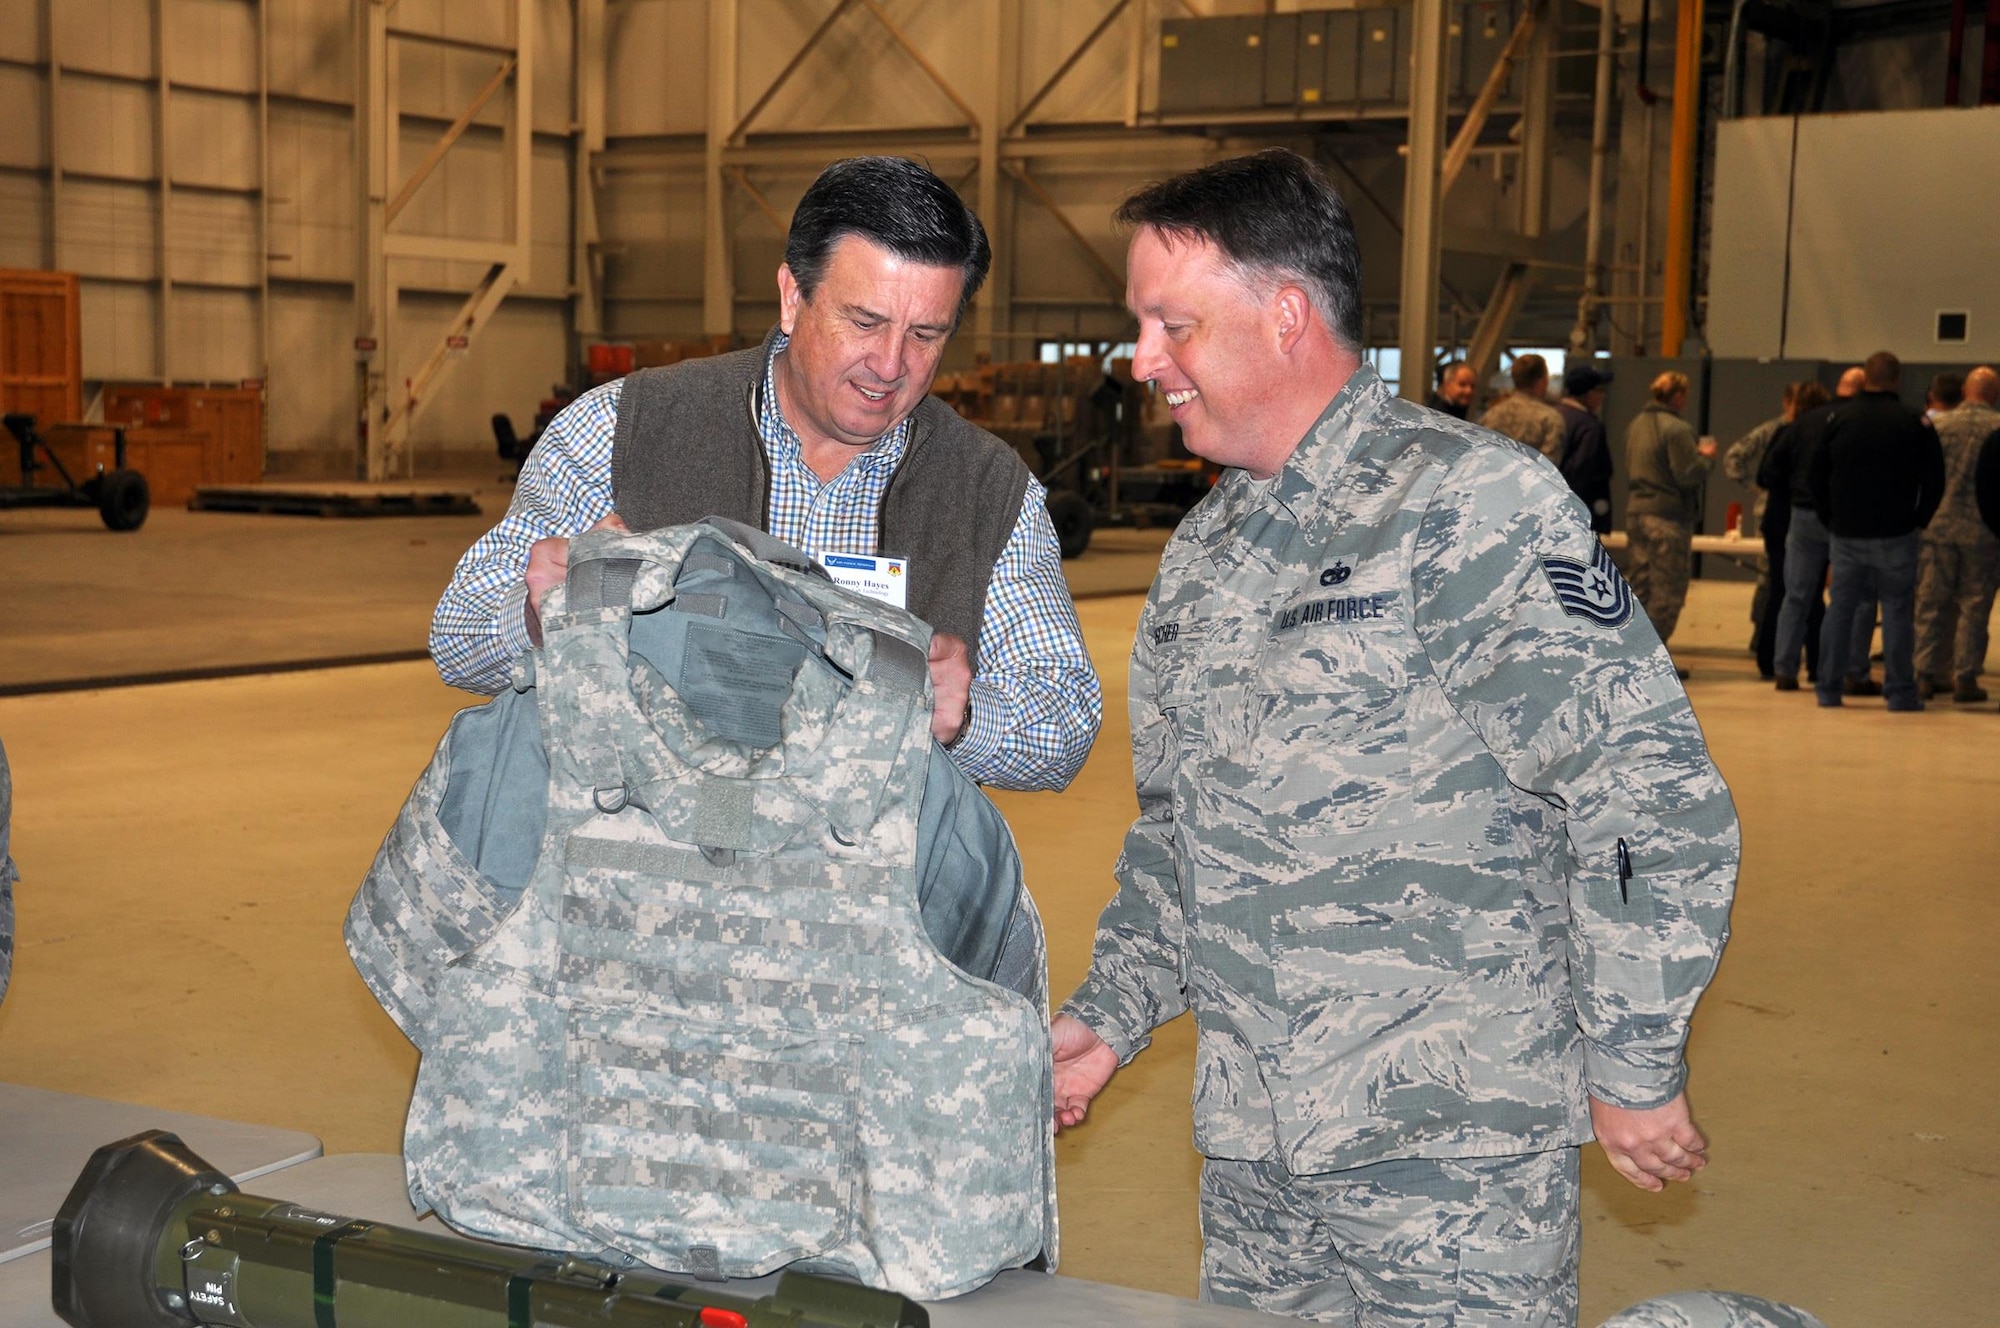 Tech. Sgt. Jeffrey Fischer, 87th Aerial Port Squadron passenger services flight craftsman, and his employer, Ronny Hayes, territory manager/vice president Hearing Lab Technology, check out a flack vest as part of the 445th Security Forces Squadron demonstration during the 445th Airlift Wing Employers Day Nov. 5, 2016. Approximately 70 employers and 35 reservists enjoyed breakfast and lunch, received a C-17 Globemaster III flight, participated in tours and demonstrations of the different jobs and training that their Air Force Reserve employees do when performing military service. The employers also received information about the Employer Support of the Guard and Reserve program. (U.S. Air Force photo/Staff Sgt. Rachel Ingram)